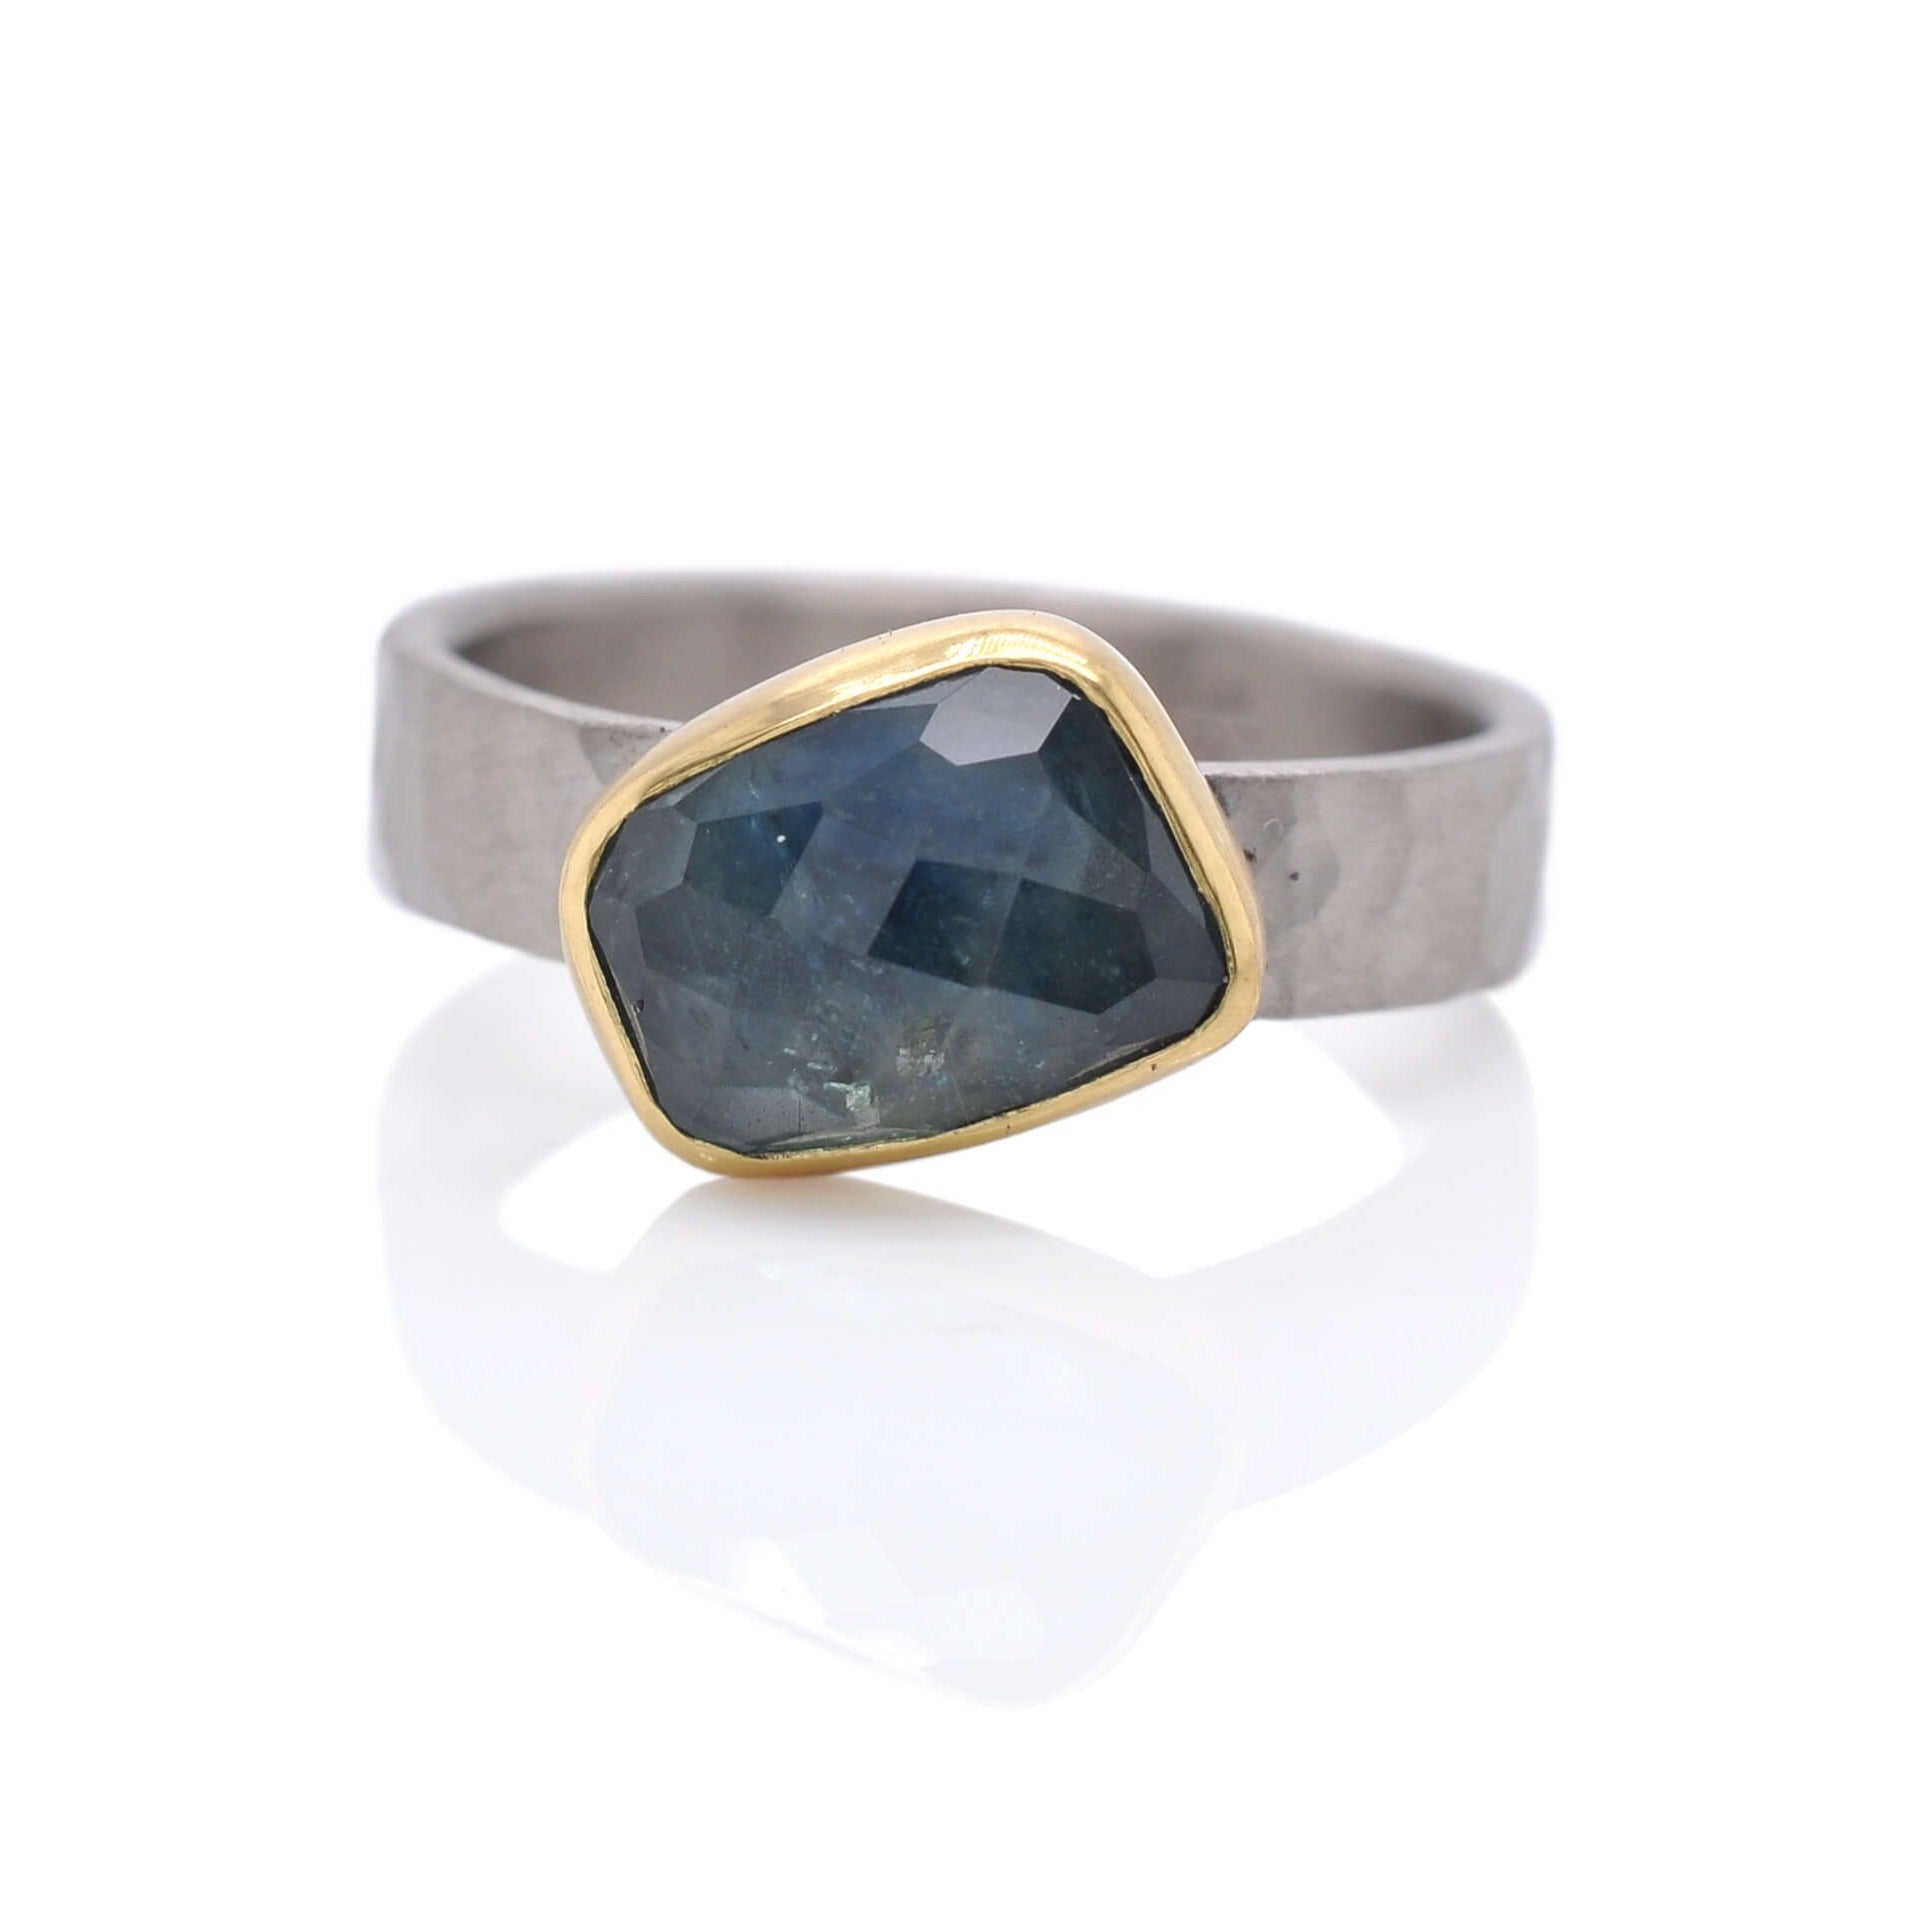 Blue sapphire ring bezel set with yellow gold on a hammered band of palladium. Handmade by EC Design Jewelry in Minneapolis, MN.